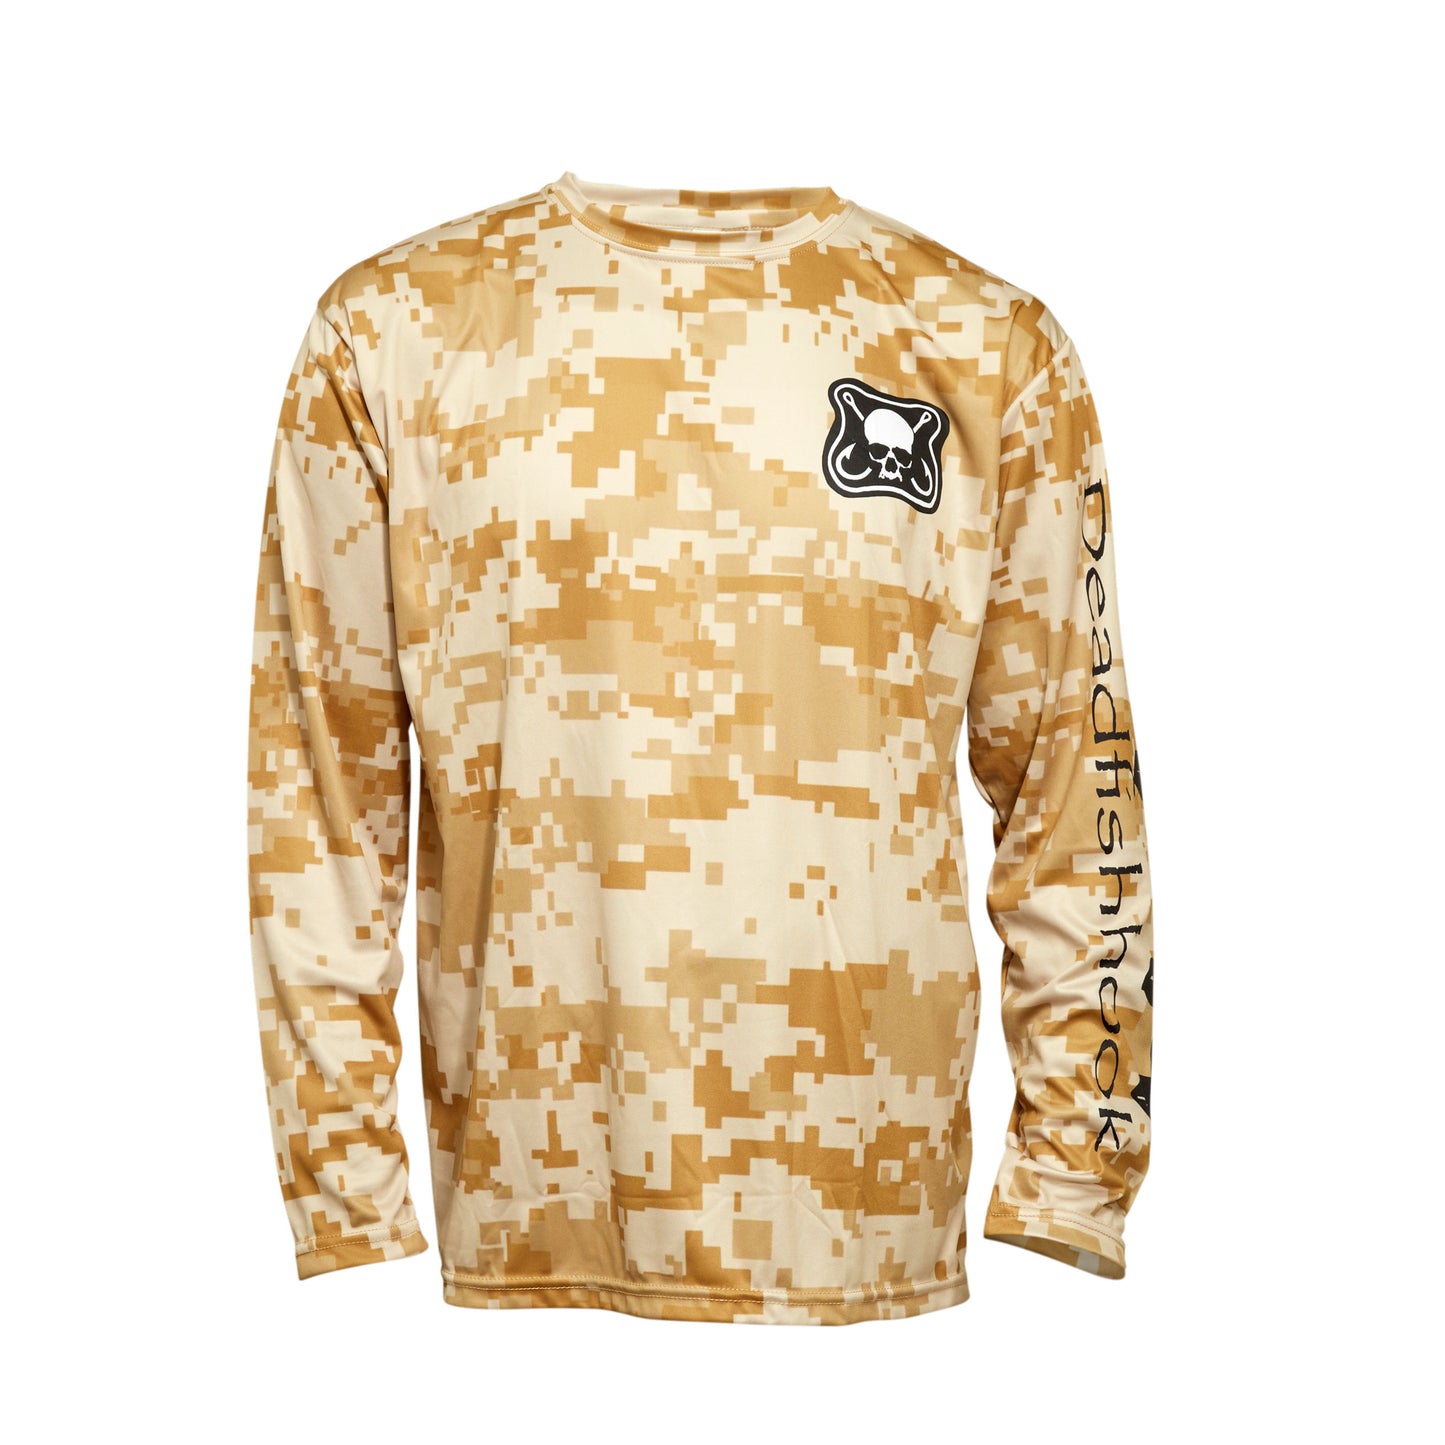 Dead Fish Hook long sleeve performance fishing shirt brown camouflage print and brand logo  front